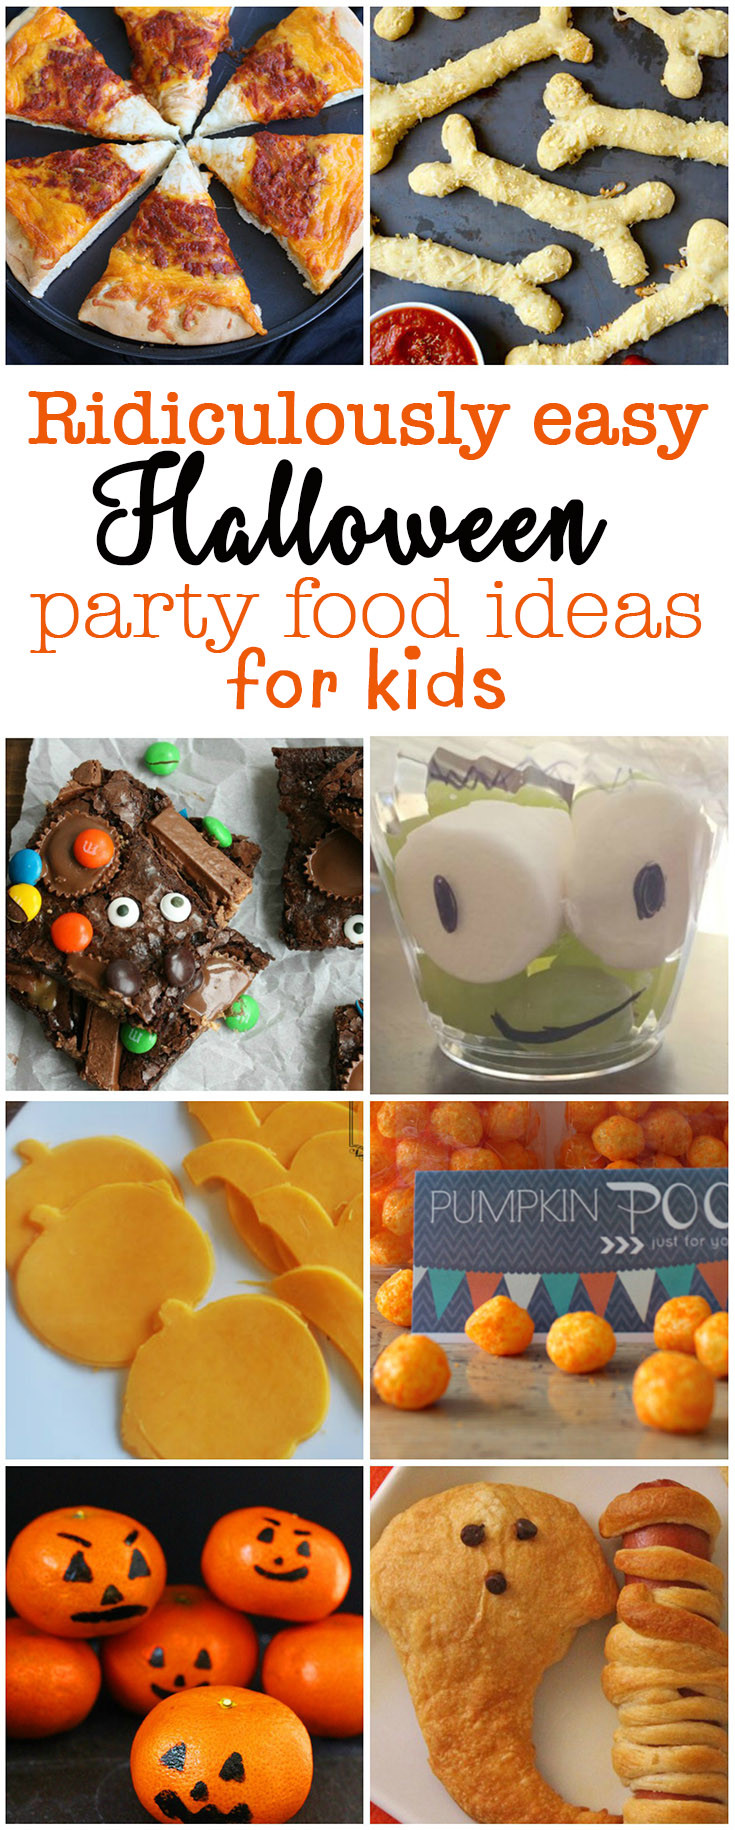 Easy Halloween Party Food Ideas
 Ridiculously easy Halloween party food for kids Eat